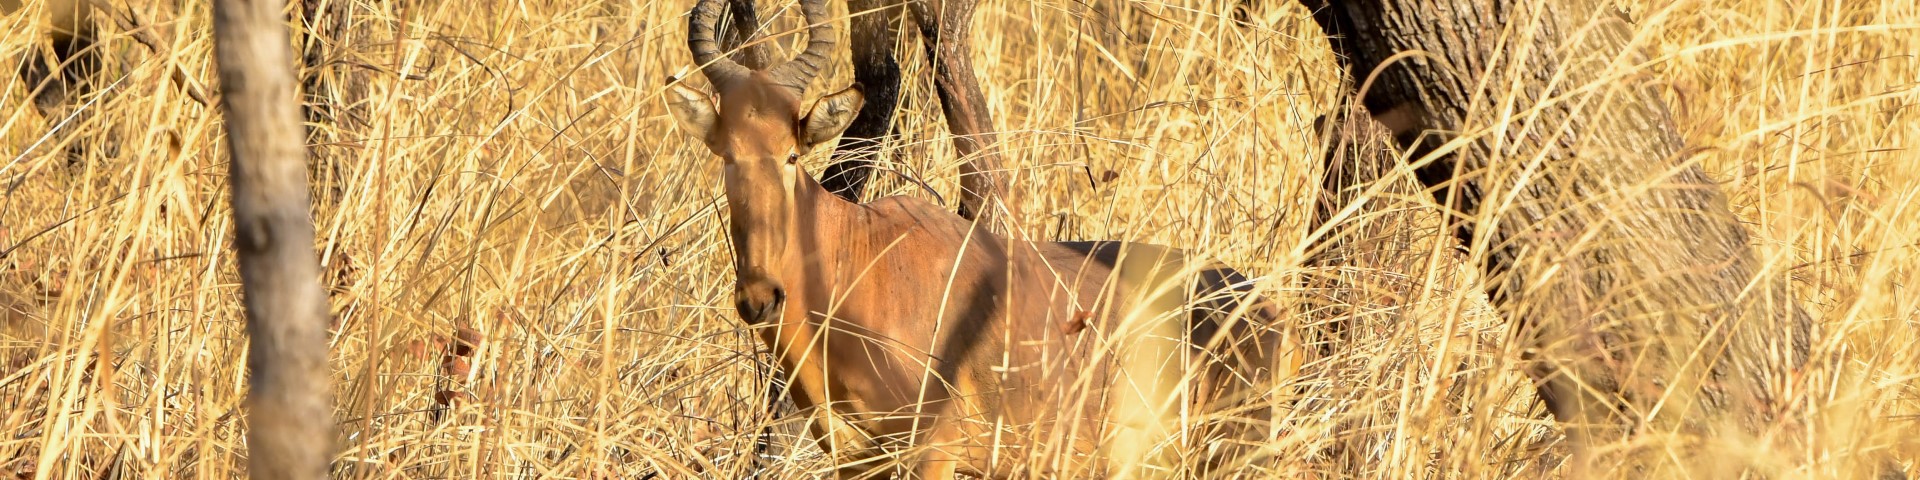 An antelope grazing in tall grass amidst a backdrop of trees.